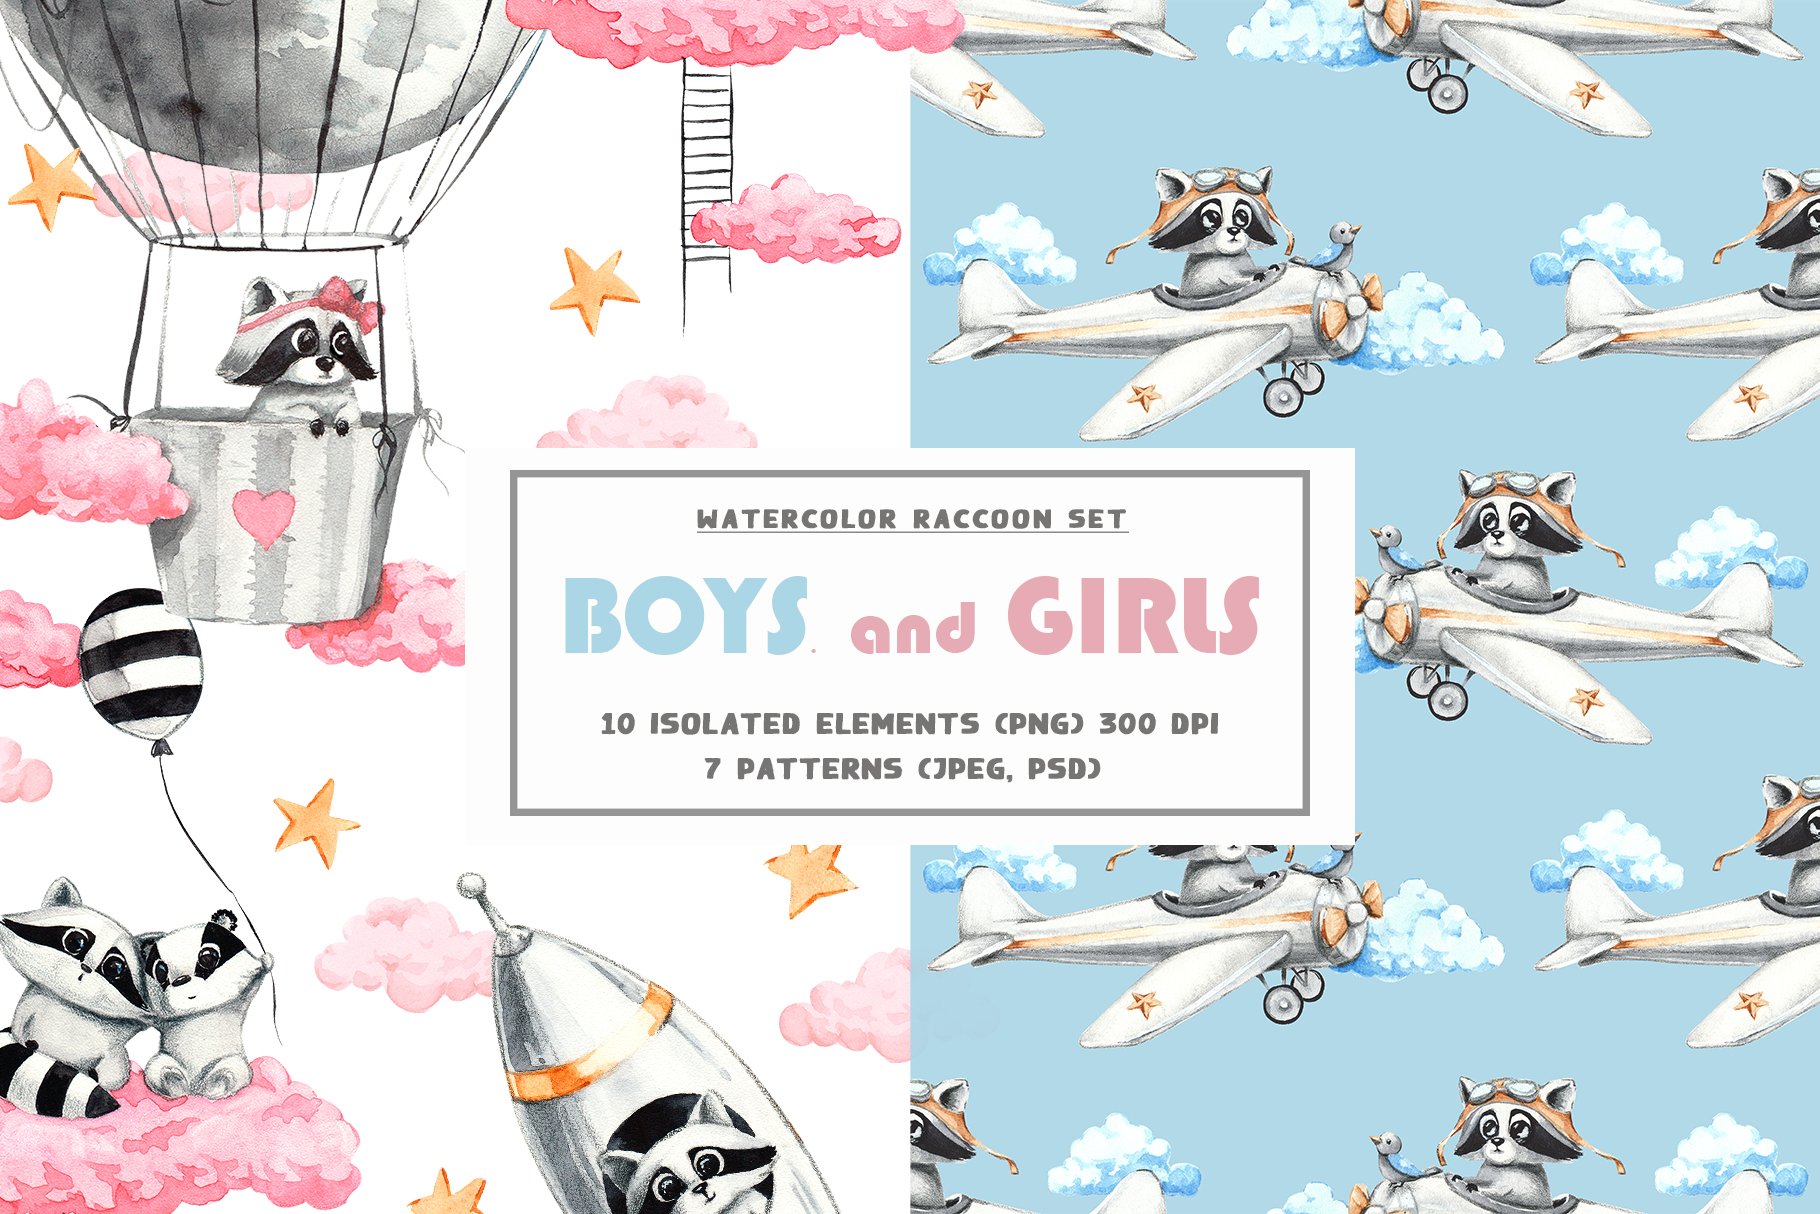 Girls and Boys baby racoon Set cover image.